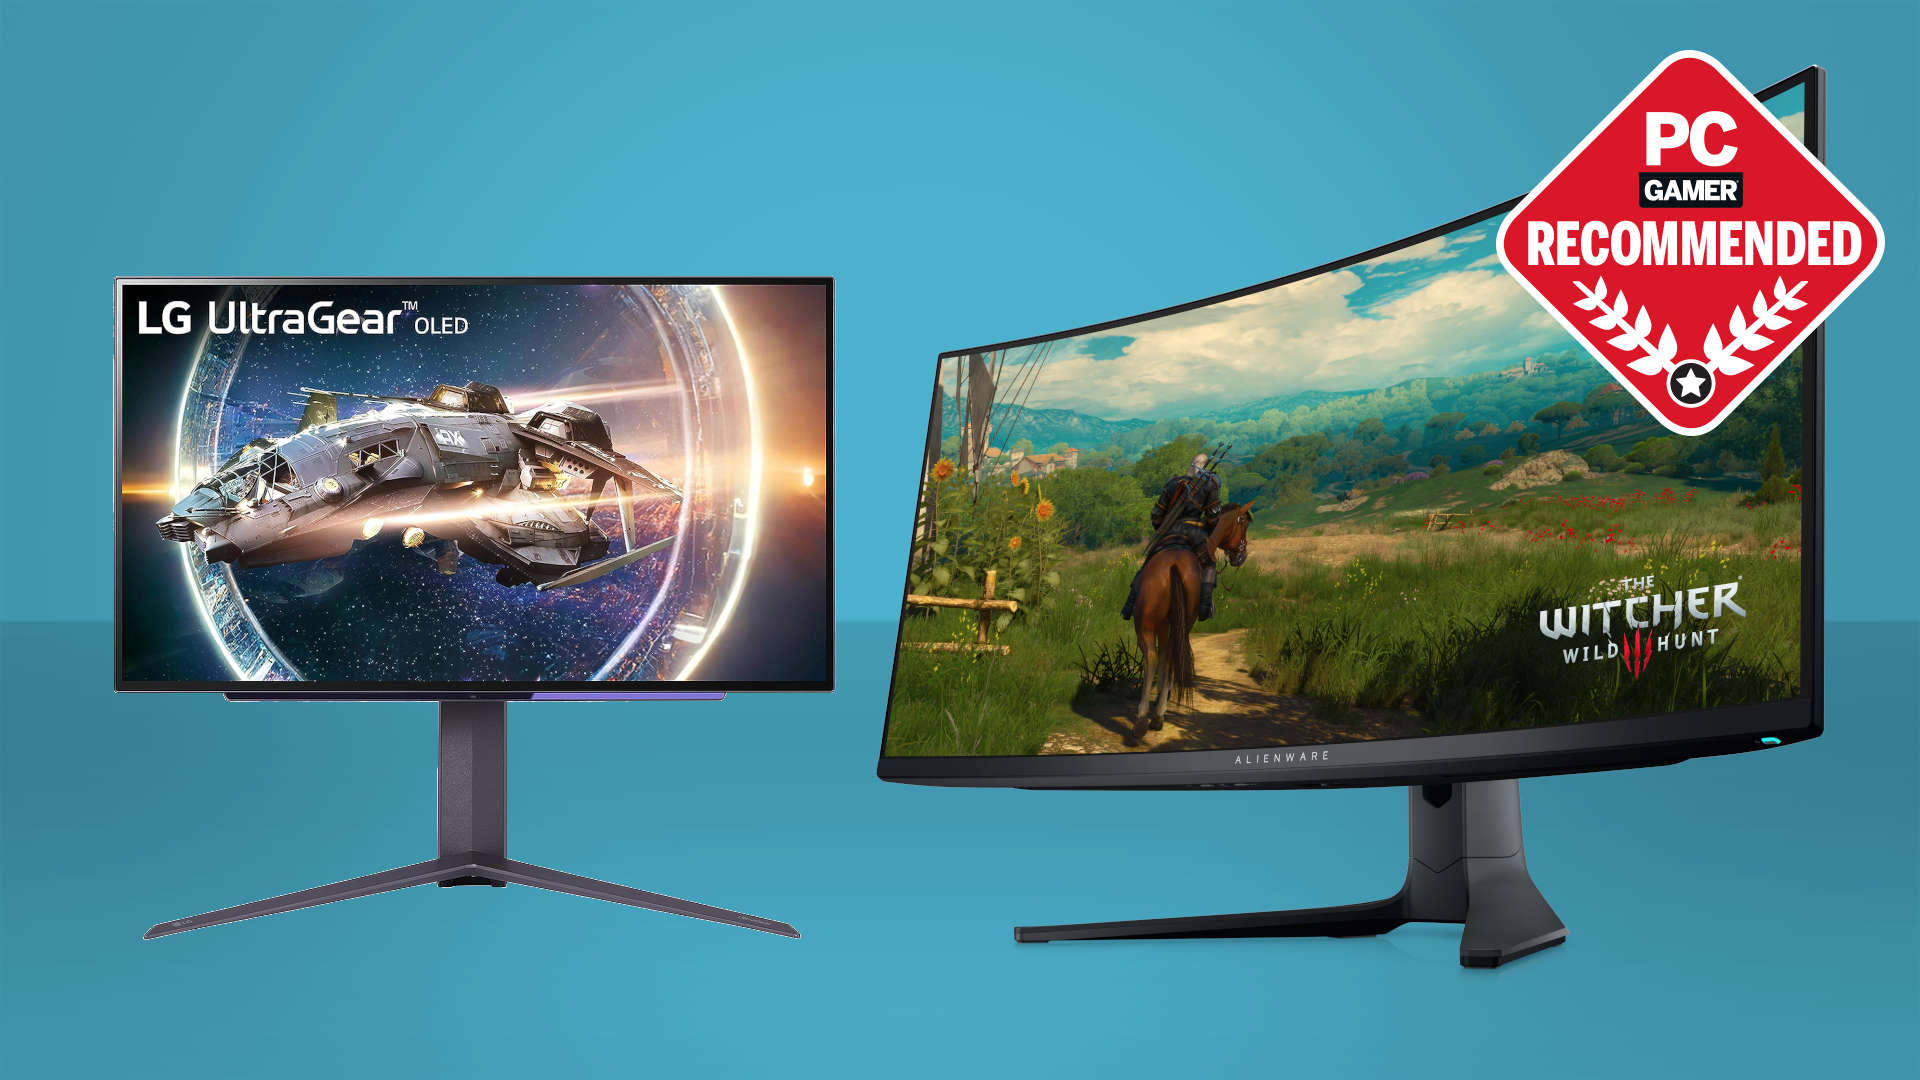 LG's new 240Hz OLED gaming monitor remains the cheapest yet